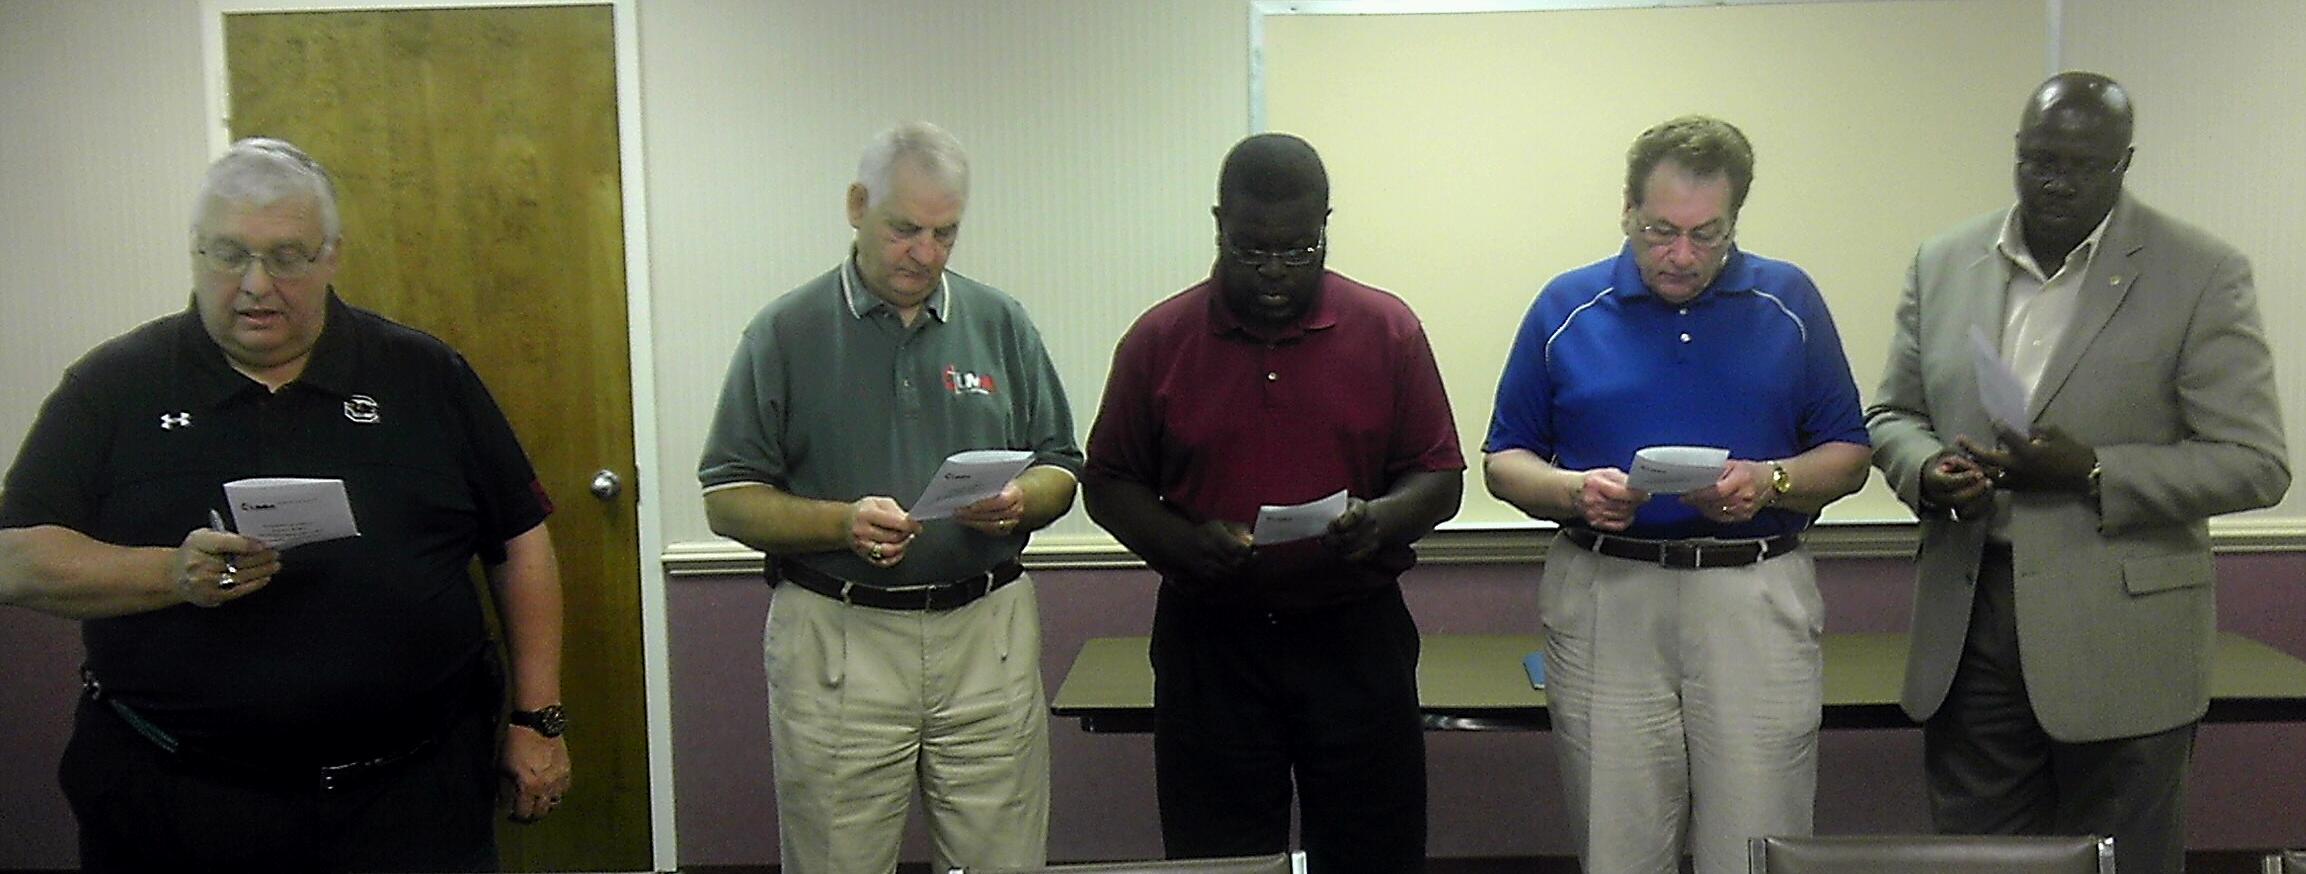 S.C. Conference United Methodist Men elects new leaders